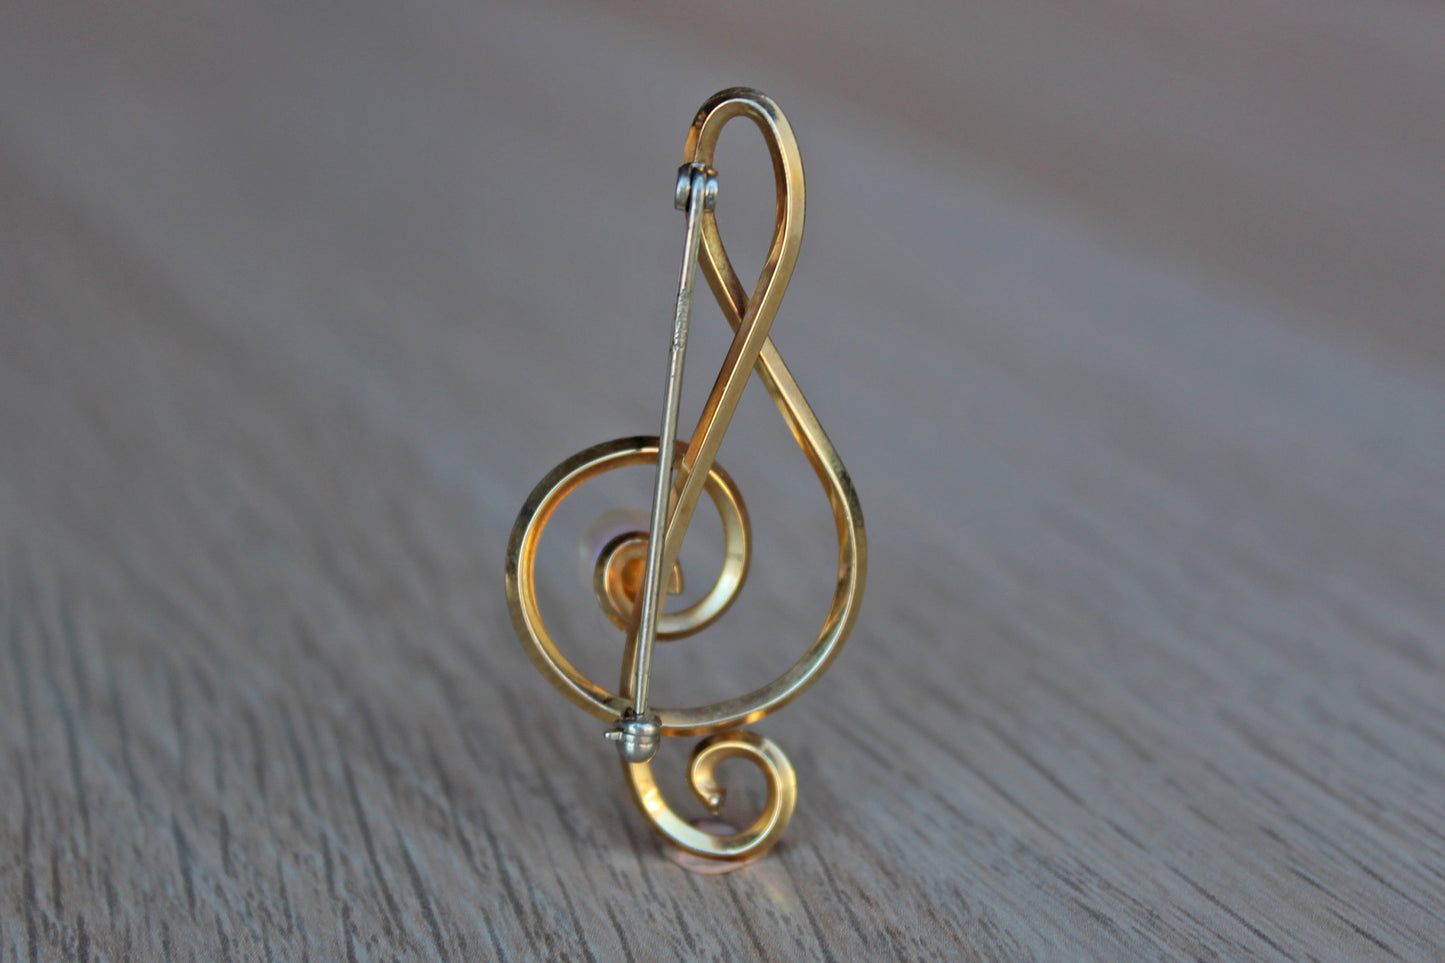 Gold Tone Treble Clef Brooch with Faux Pearl Accent